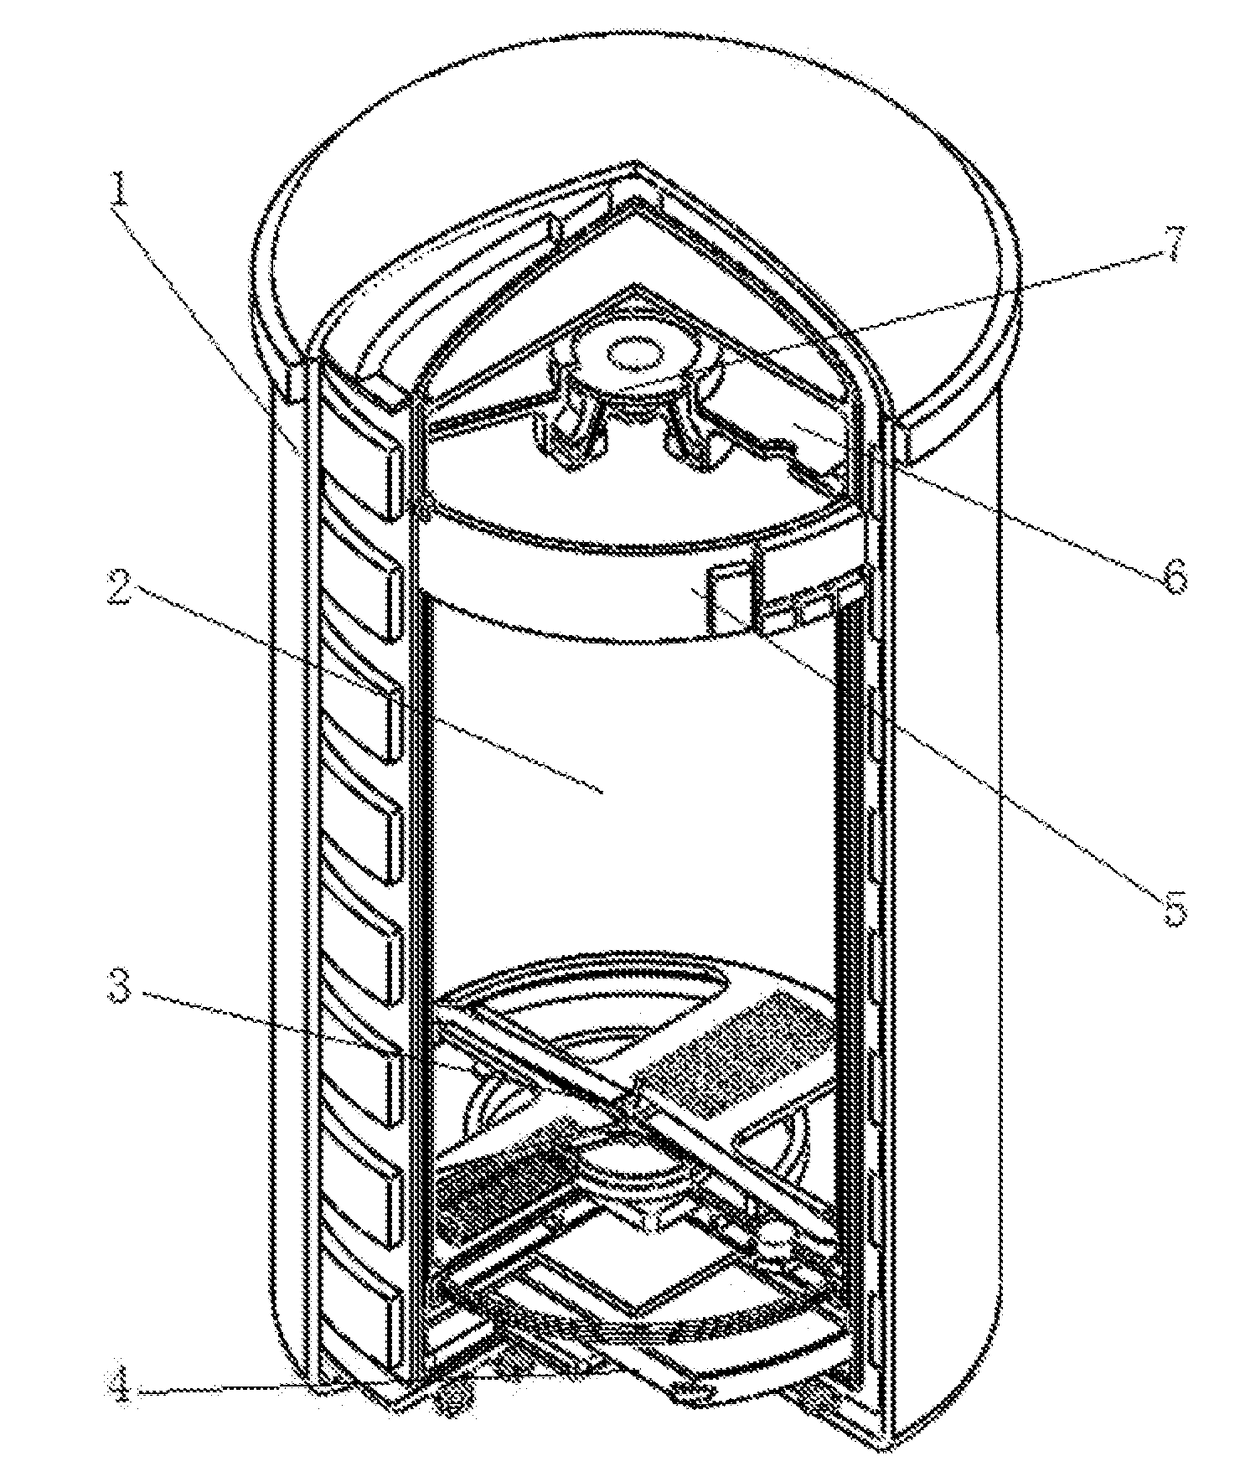 Autonomous Anti-pollution liquid container for isotope analysing of earth science area